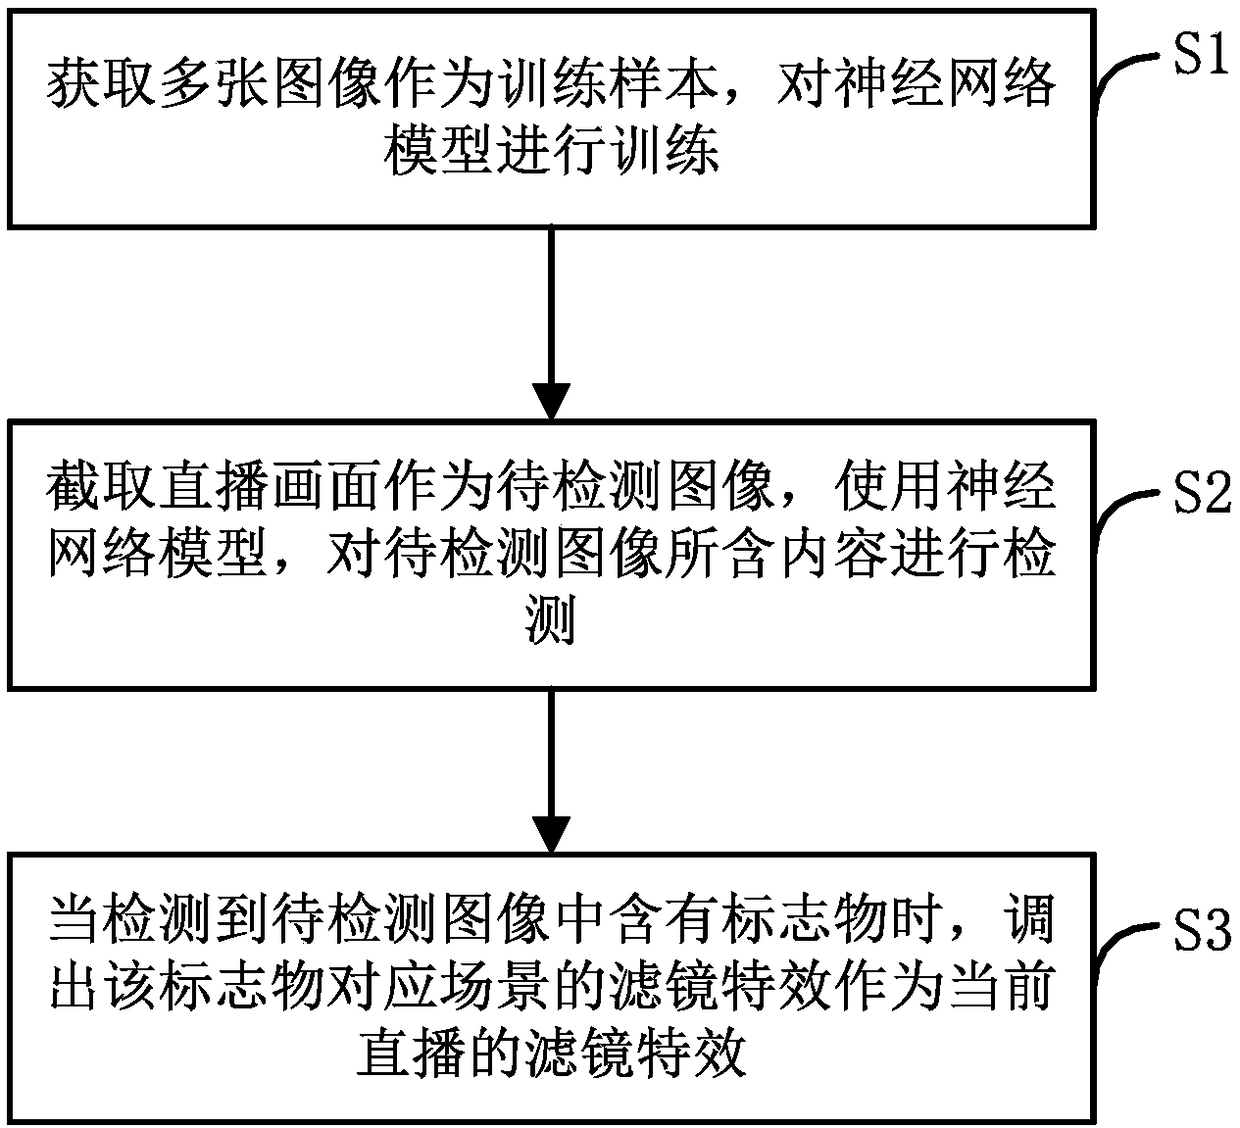 Automatic filter implementation method, storage medium, device and system